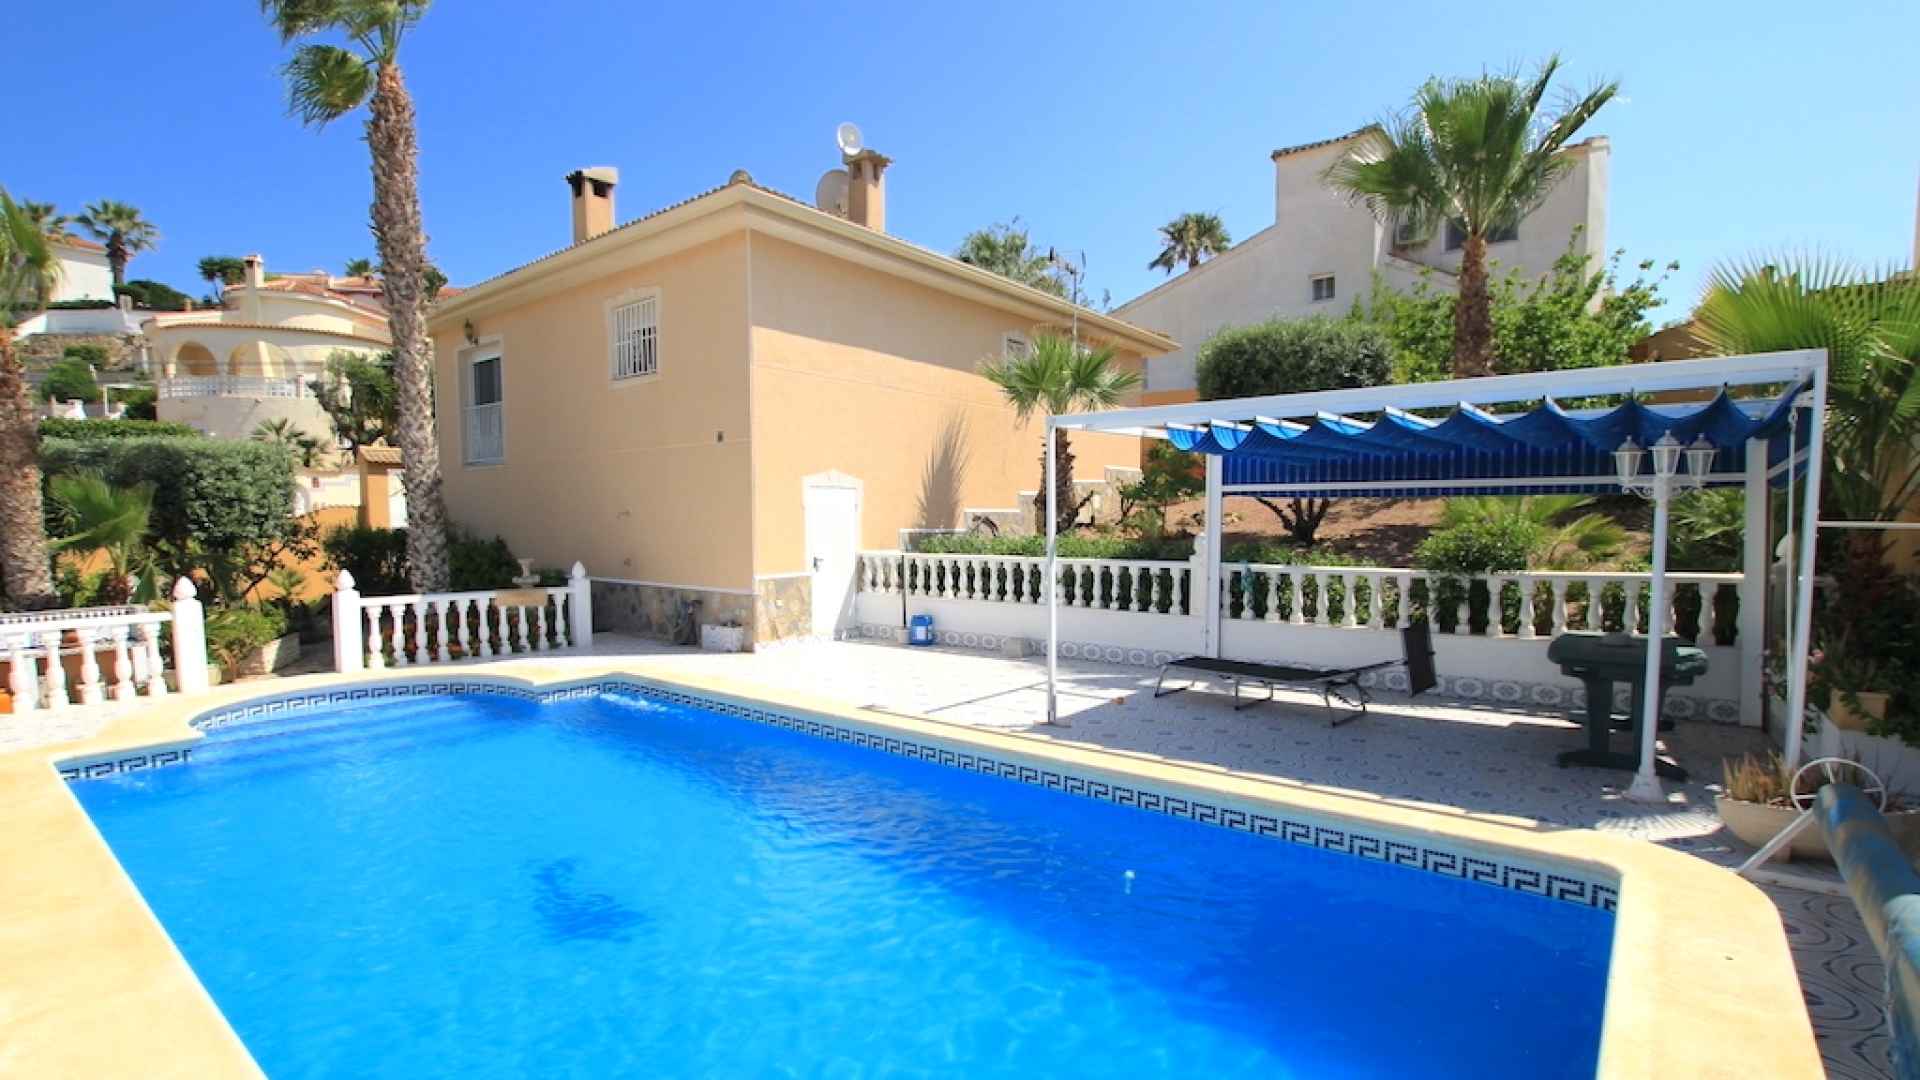 48133_spacious_210sqm_detached_villa_with_internal_garage___private_pool_260623093702_img_5901